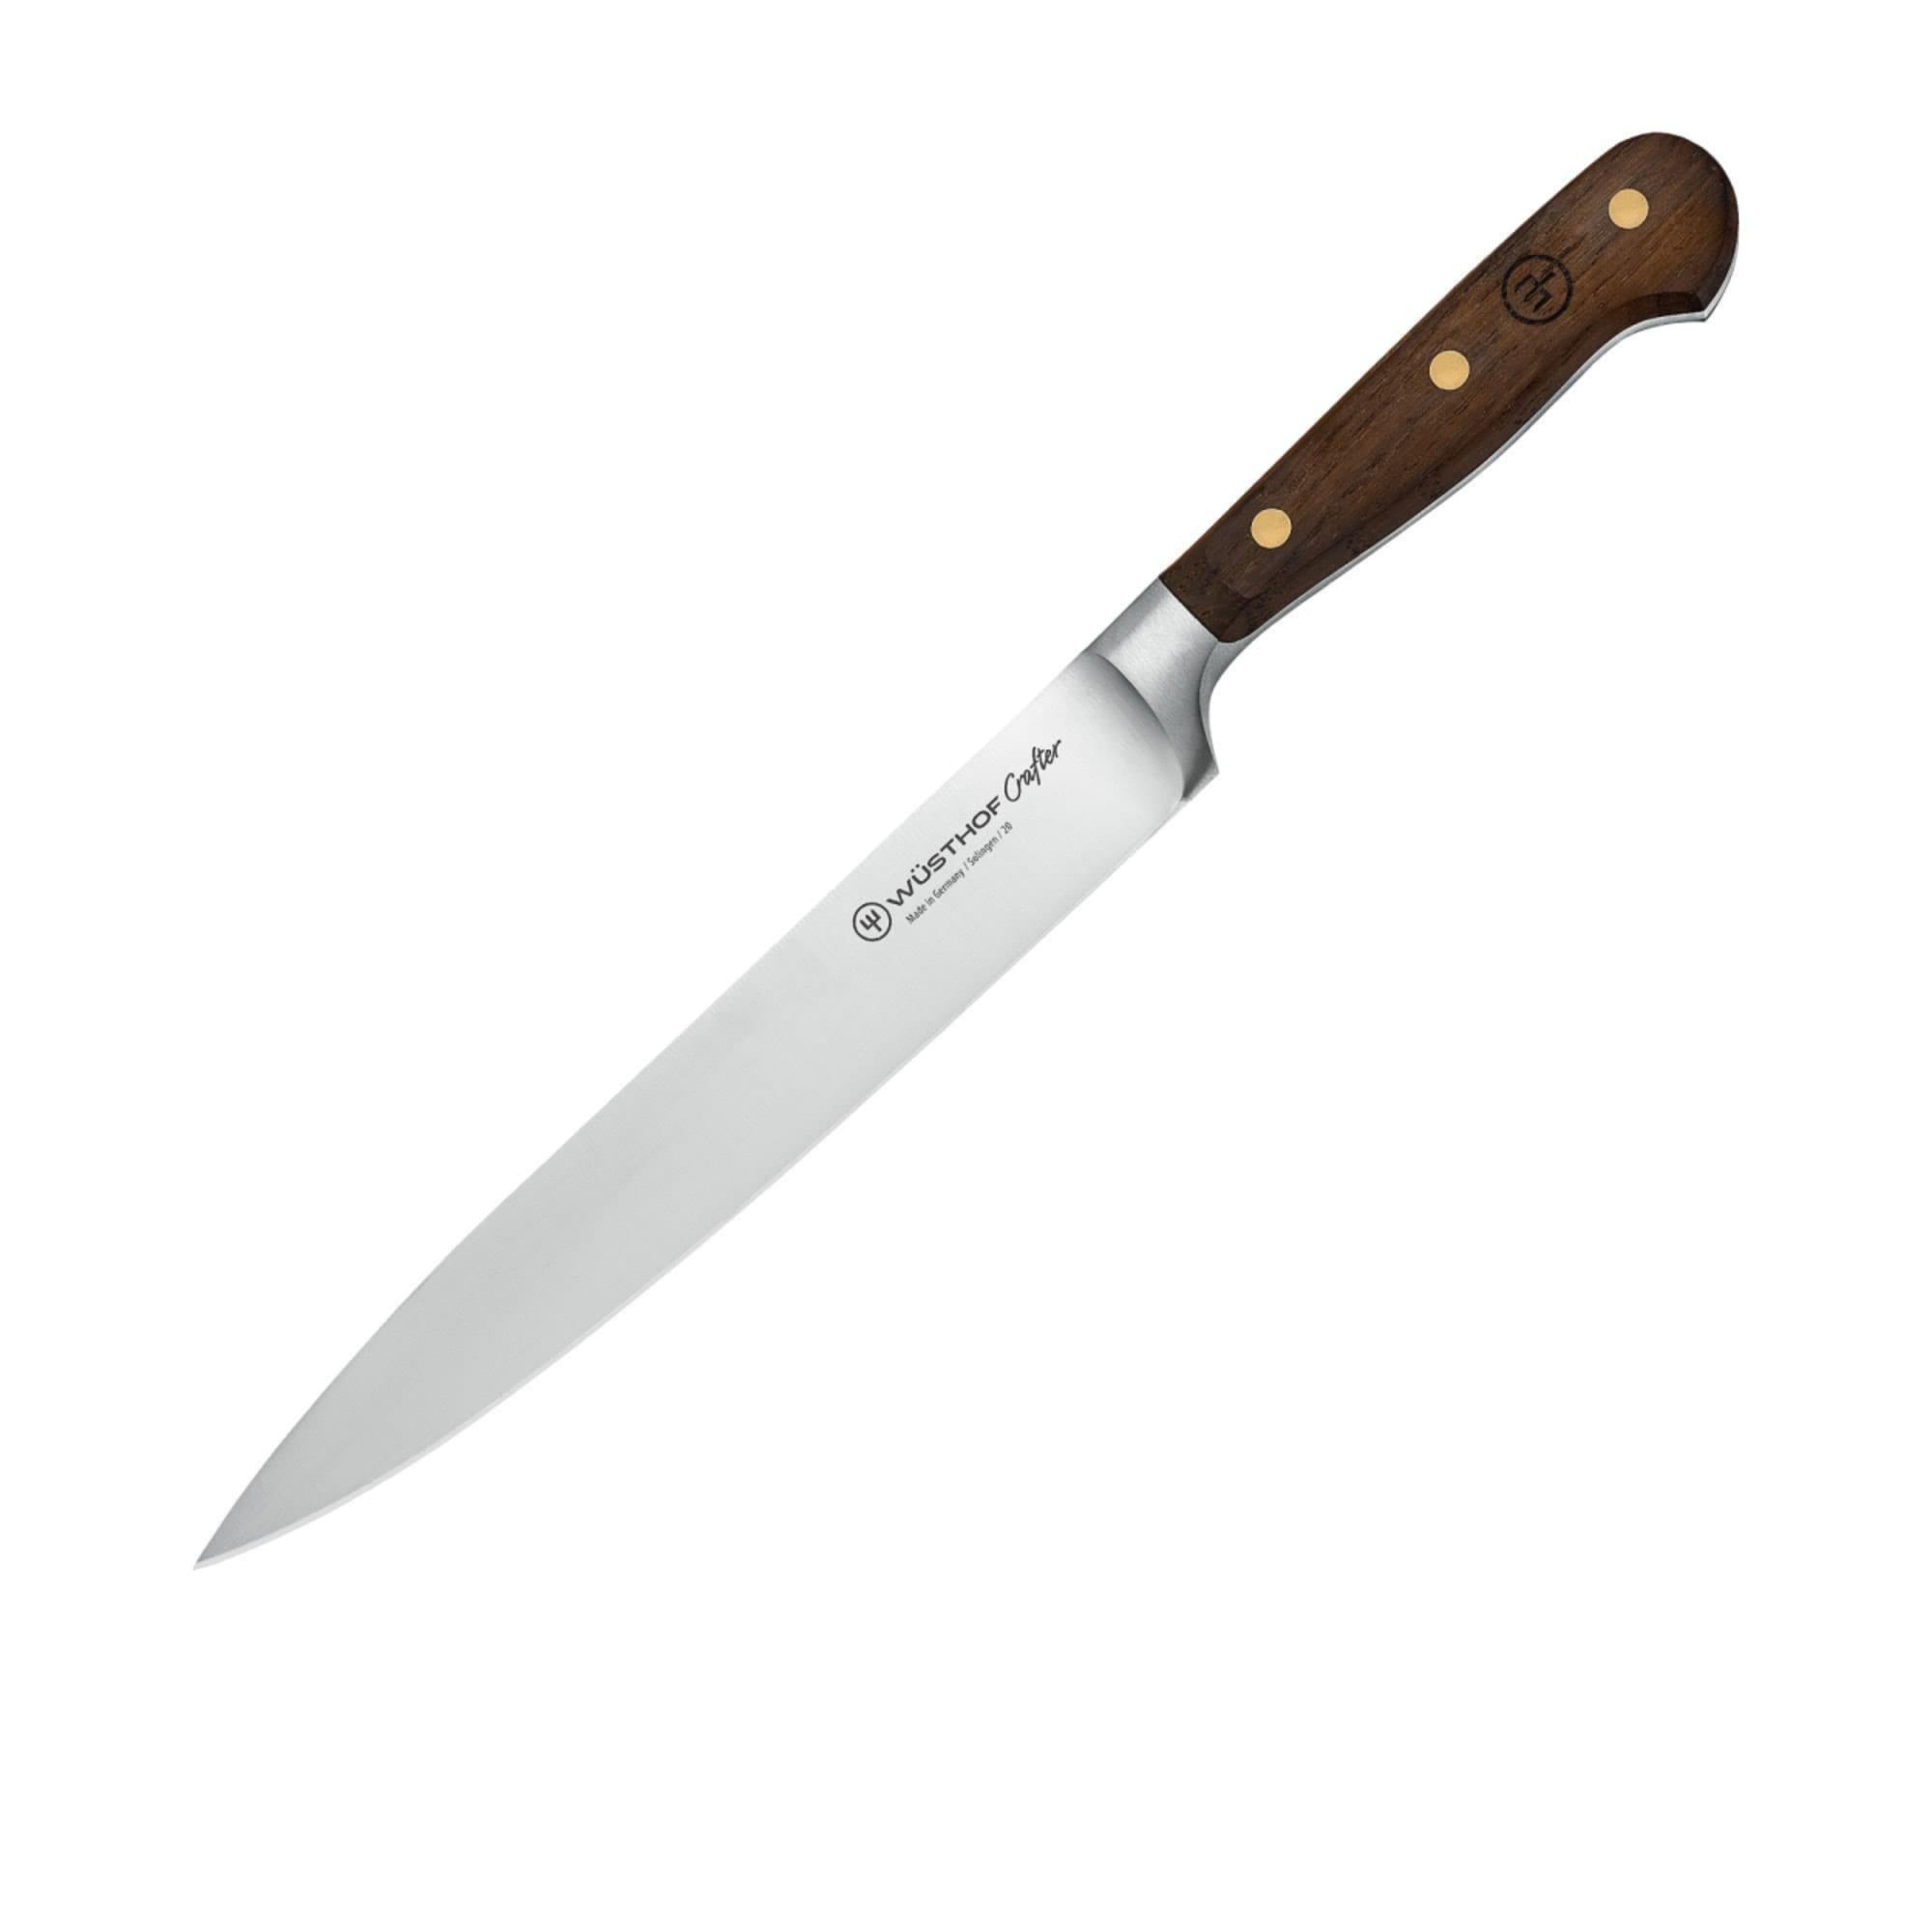 Wusthof Crafter Carving Knife 20cm Image 1